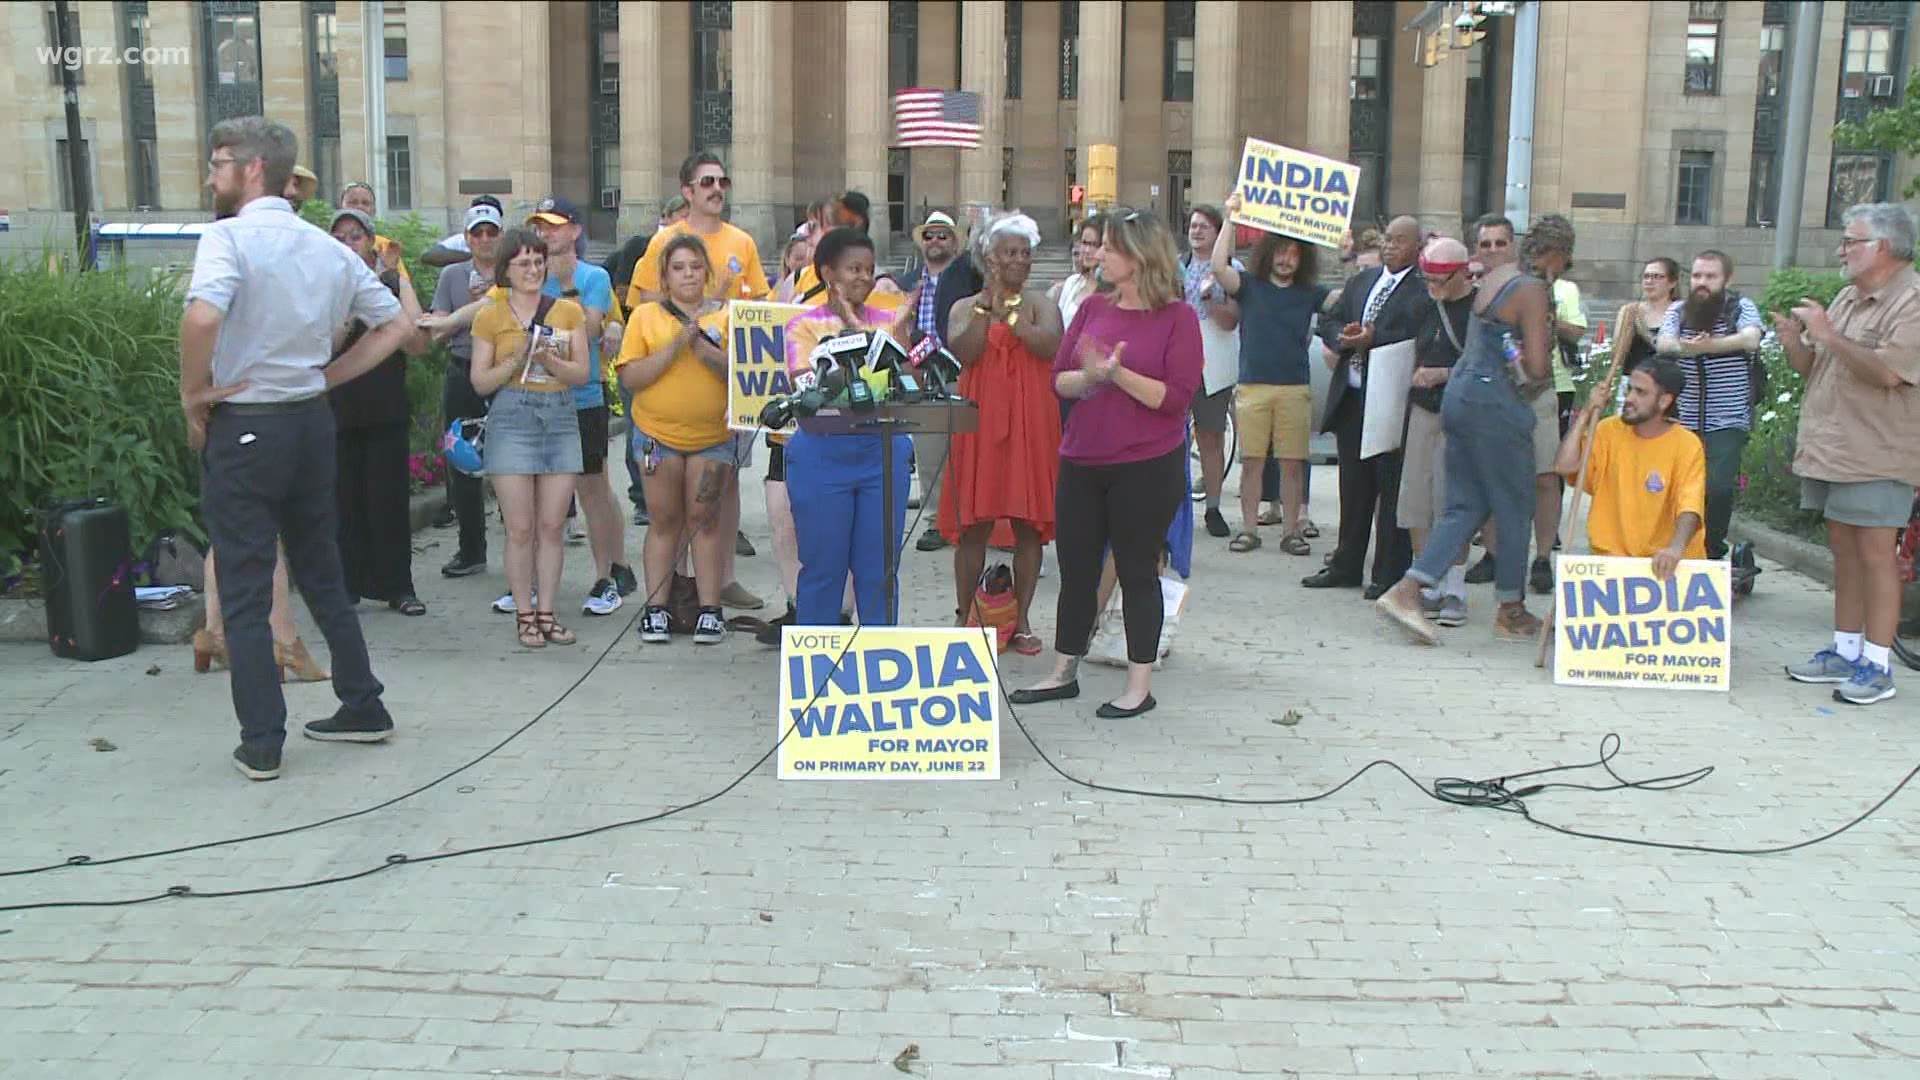 We're starting to learn more about who will be backing which candidate. Tonight, Walton's supporters held a rally in Niagara Square.